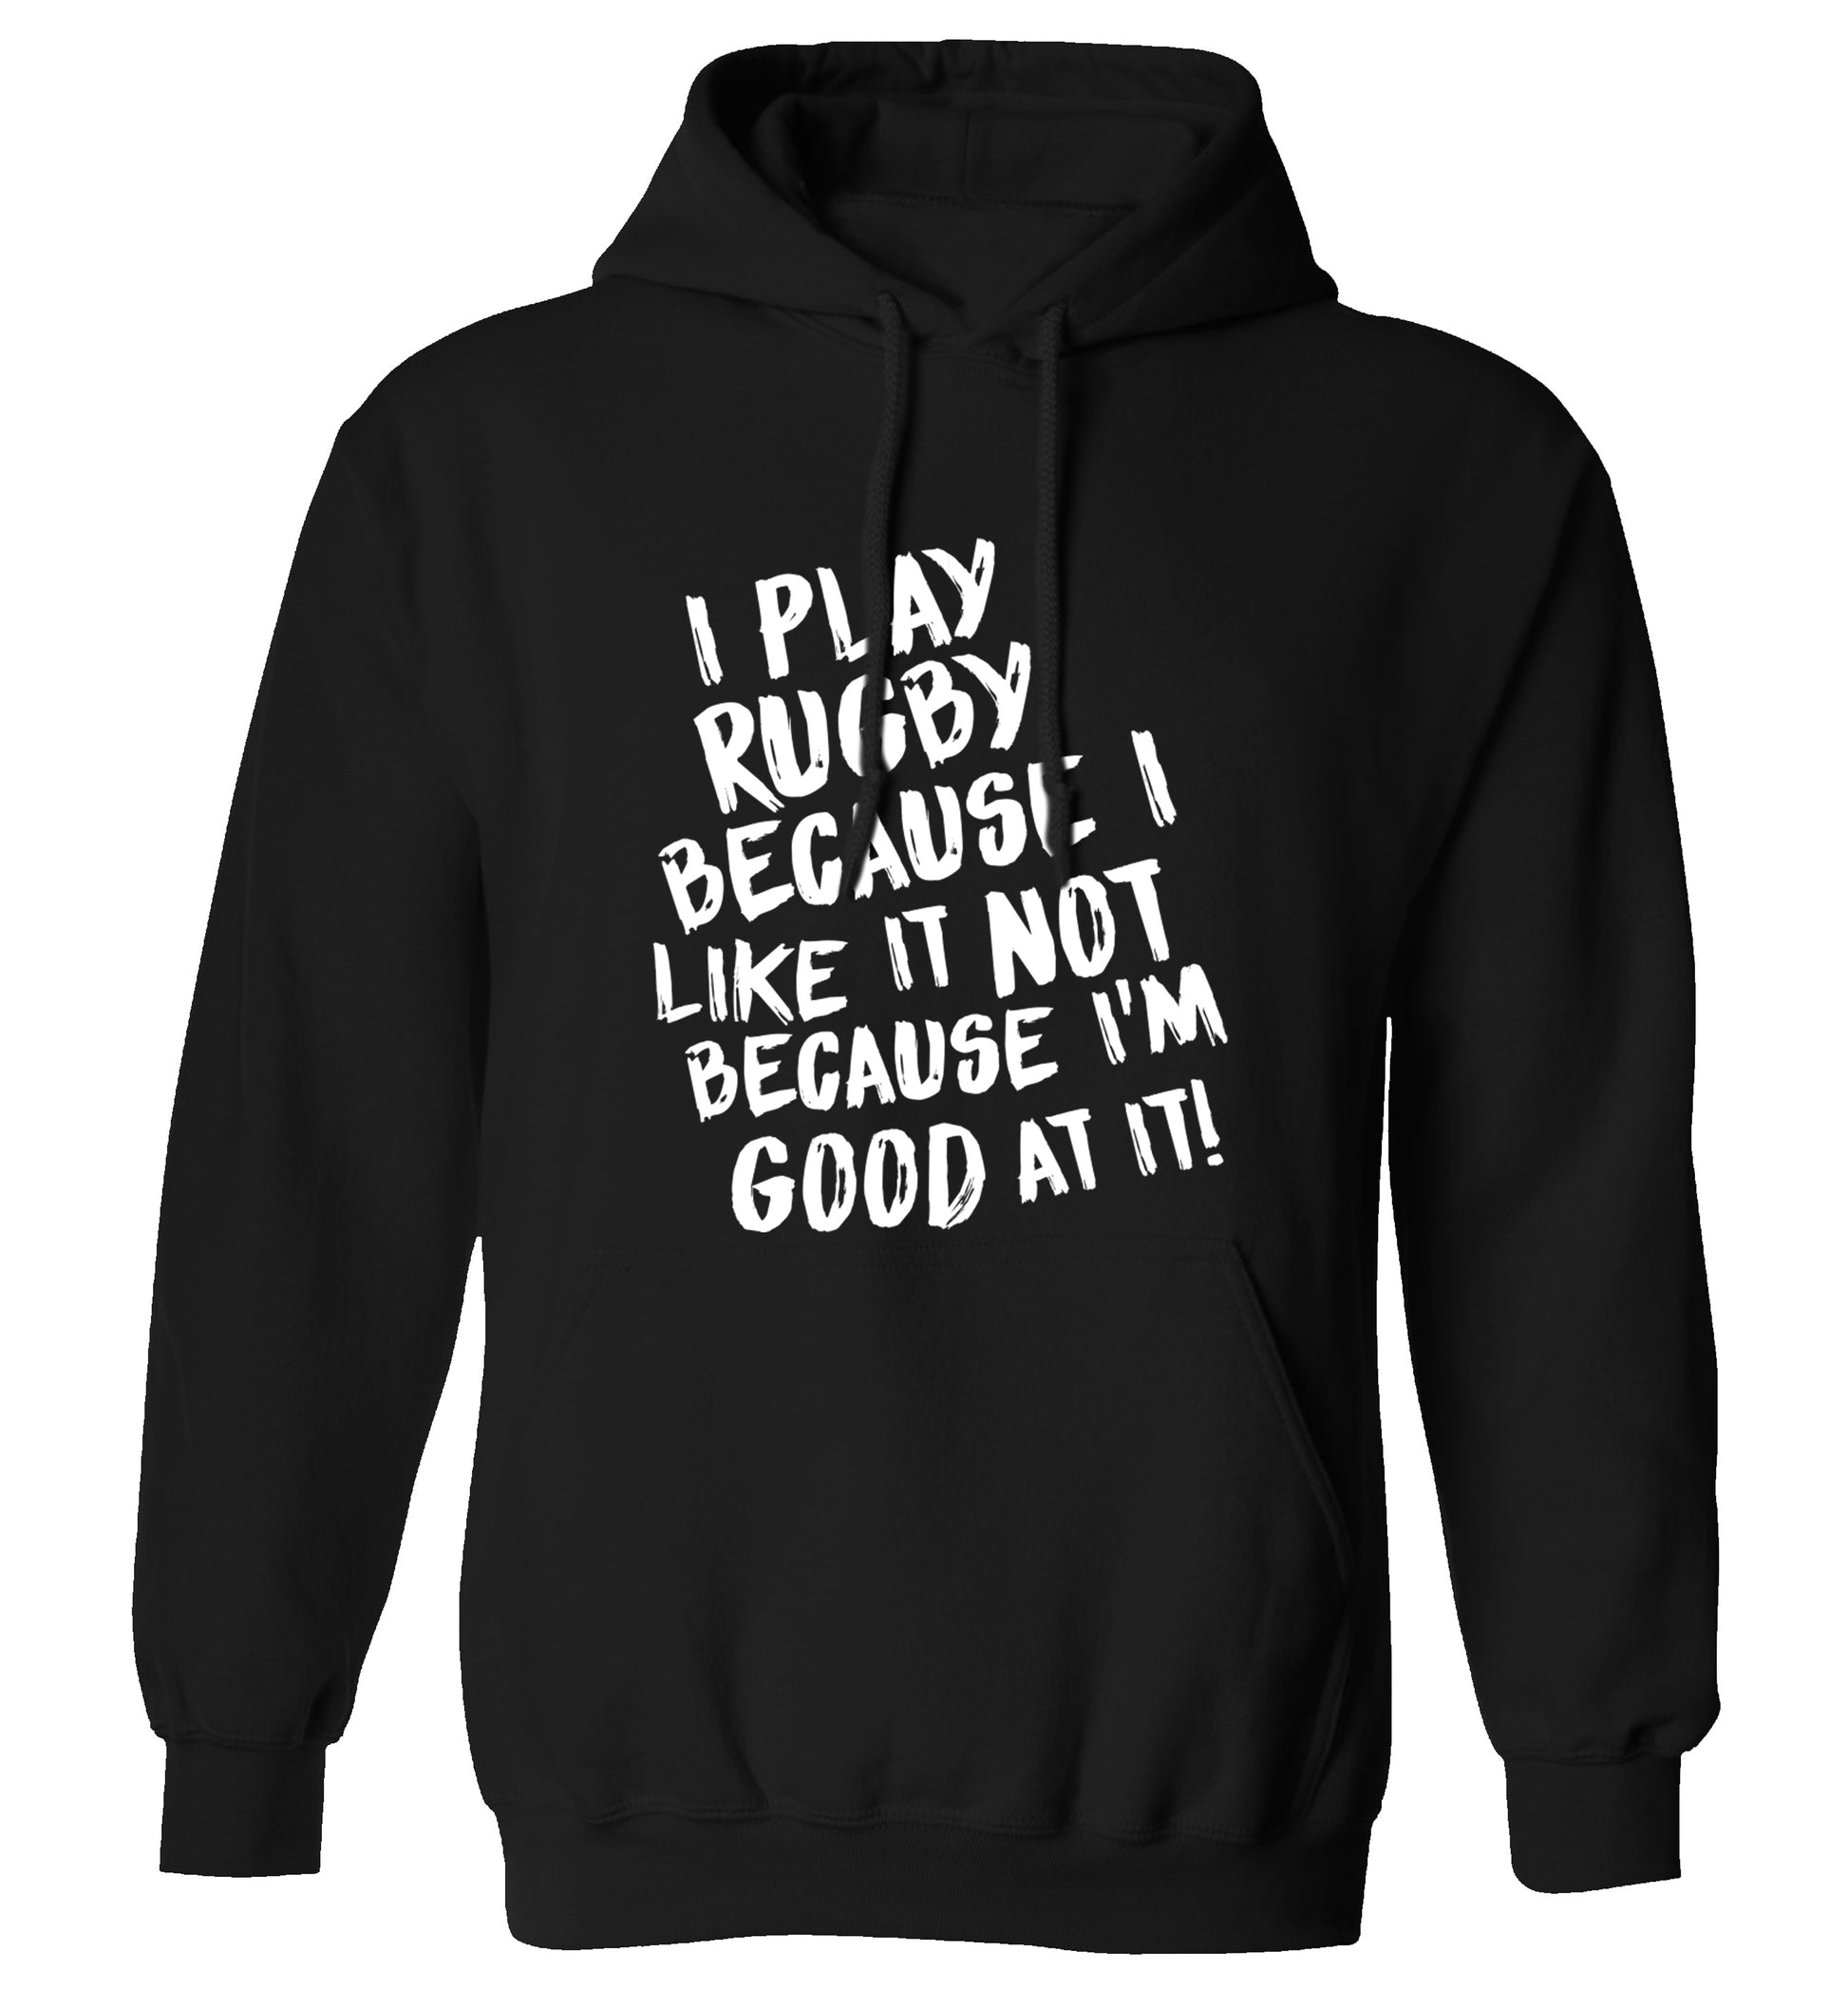 I play rugby because I like it not because I'm good at it adults unisex black hoodie 2XL